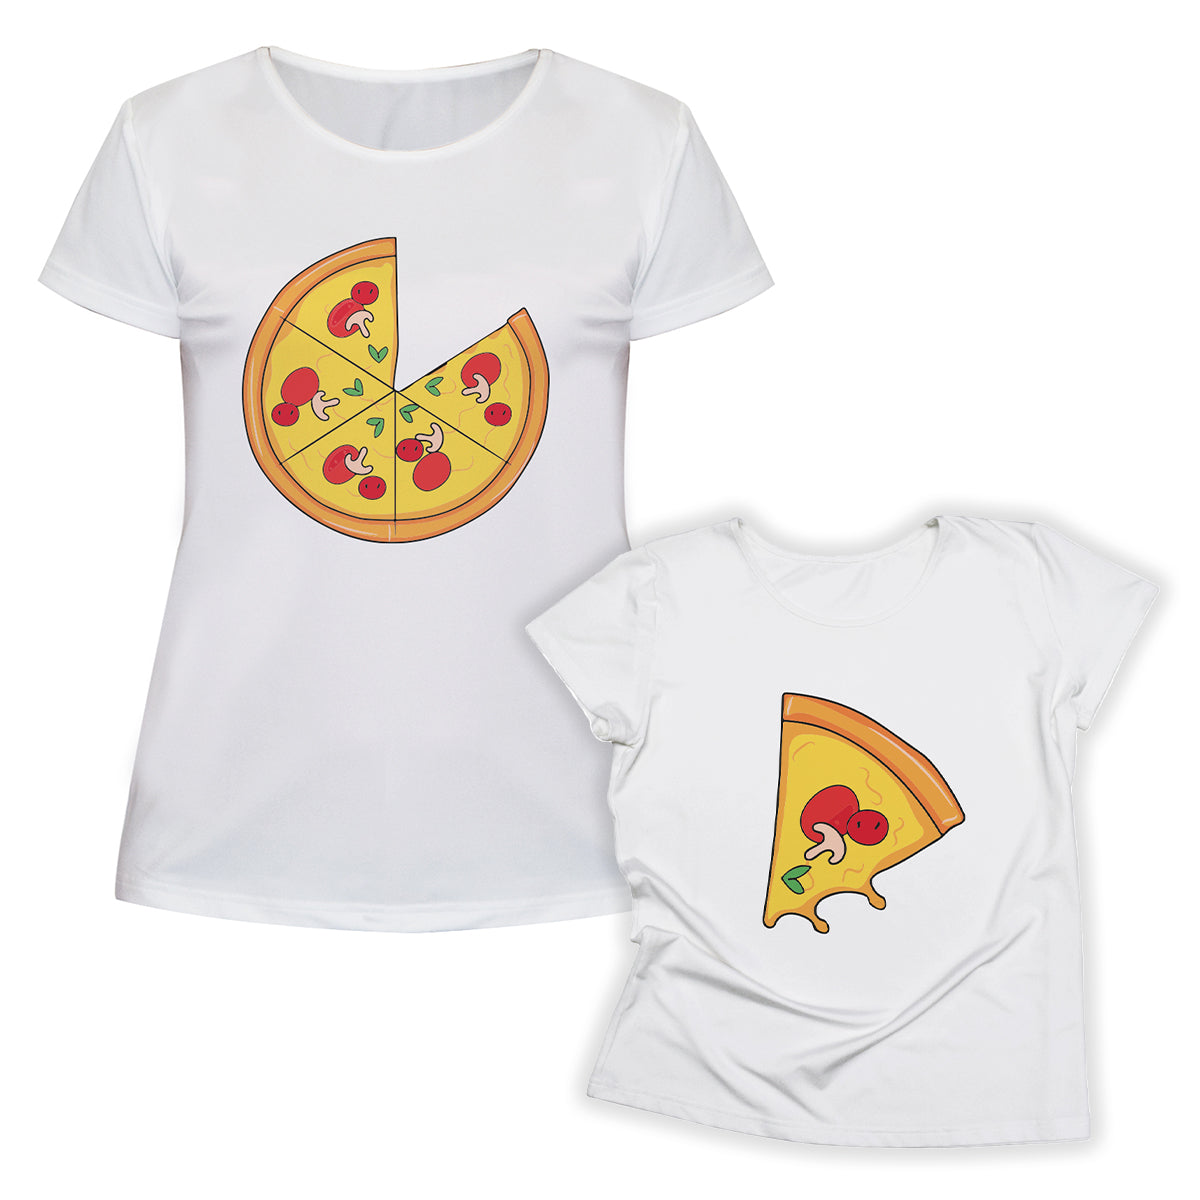 Piece Of Pizza White Short Sleeve Tee Shirt - Wimziy&Co.